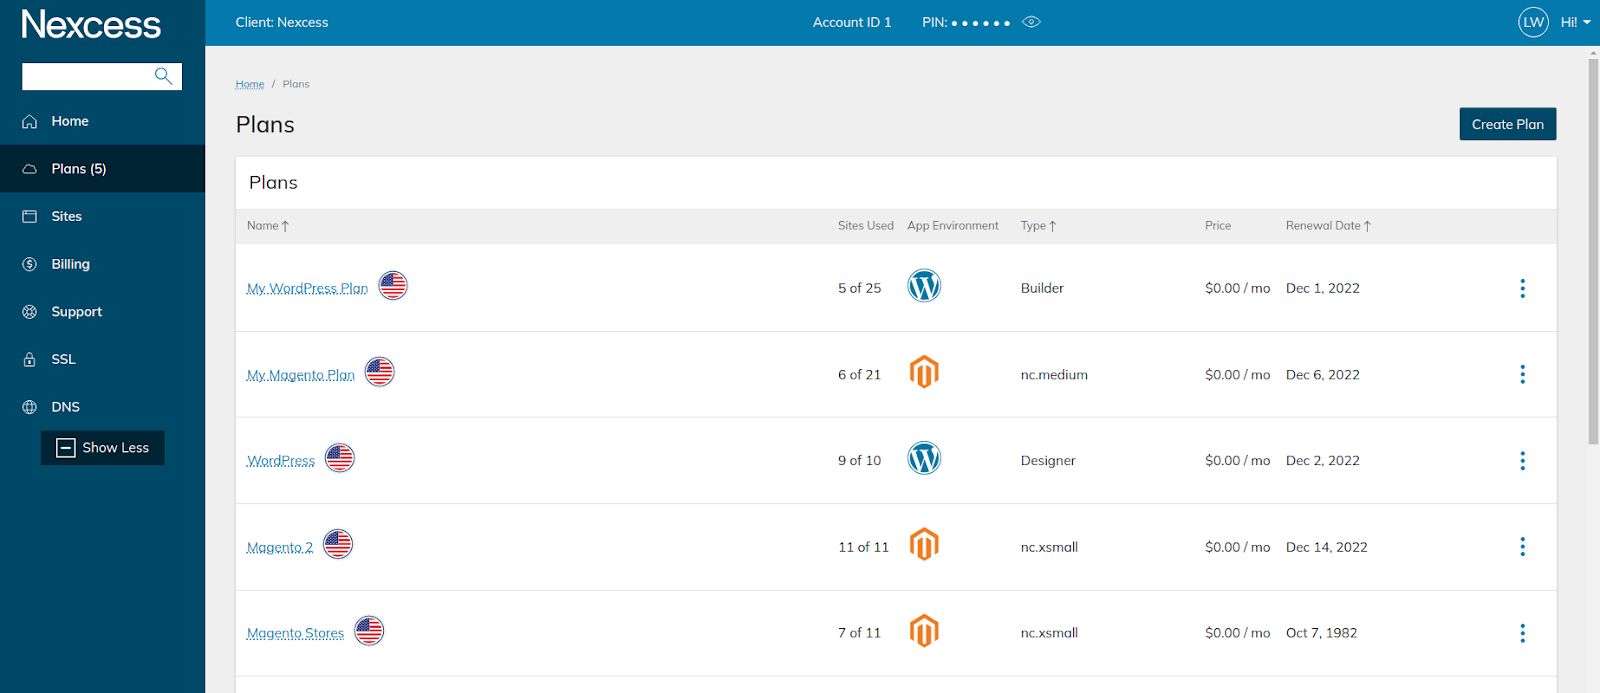 You can log in to your WordPress, WooCommerce, or StoreBuilder portal from the main menu.